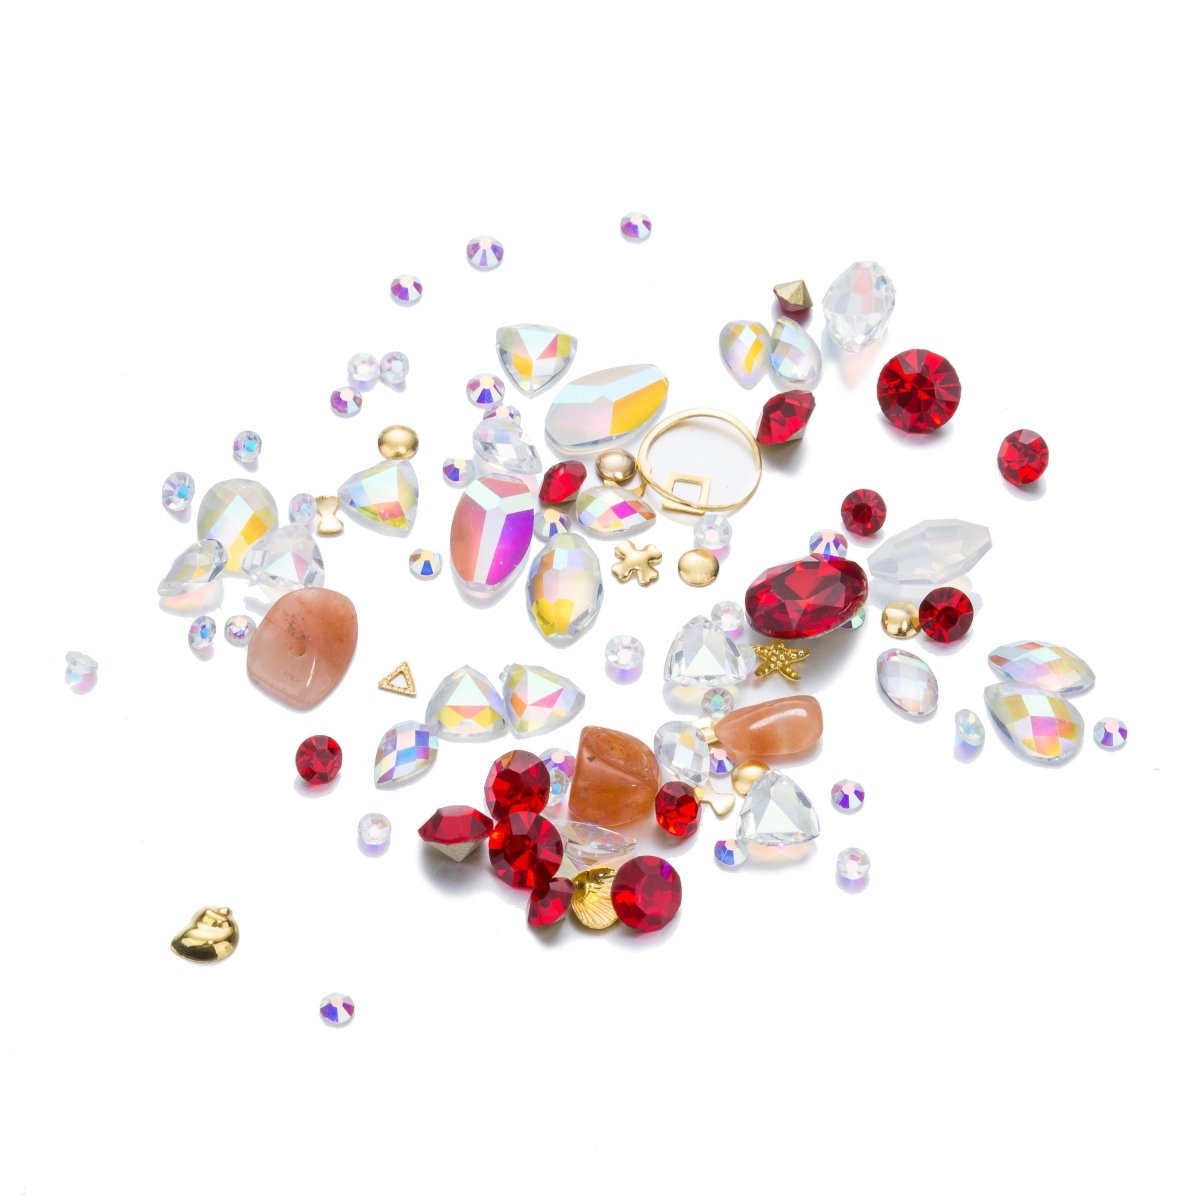 Mixed Crystal - Crystal AB, Bright Red Light Siam Crystal, and Yellow Topaz Crystal - Mixed Styles and Size Nail Rhinestones, embellishments, 04.30-9752 - DLUXCA